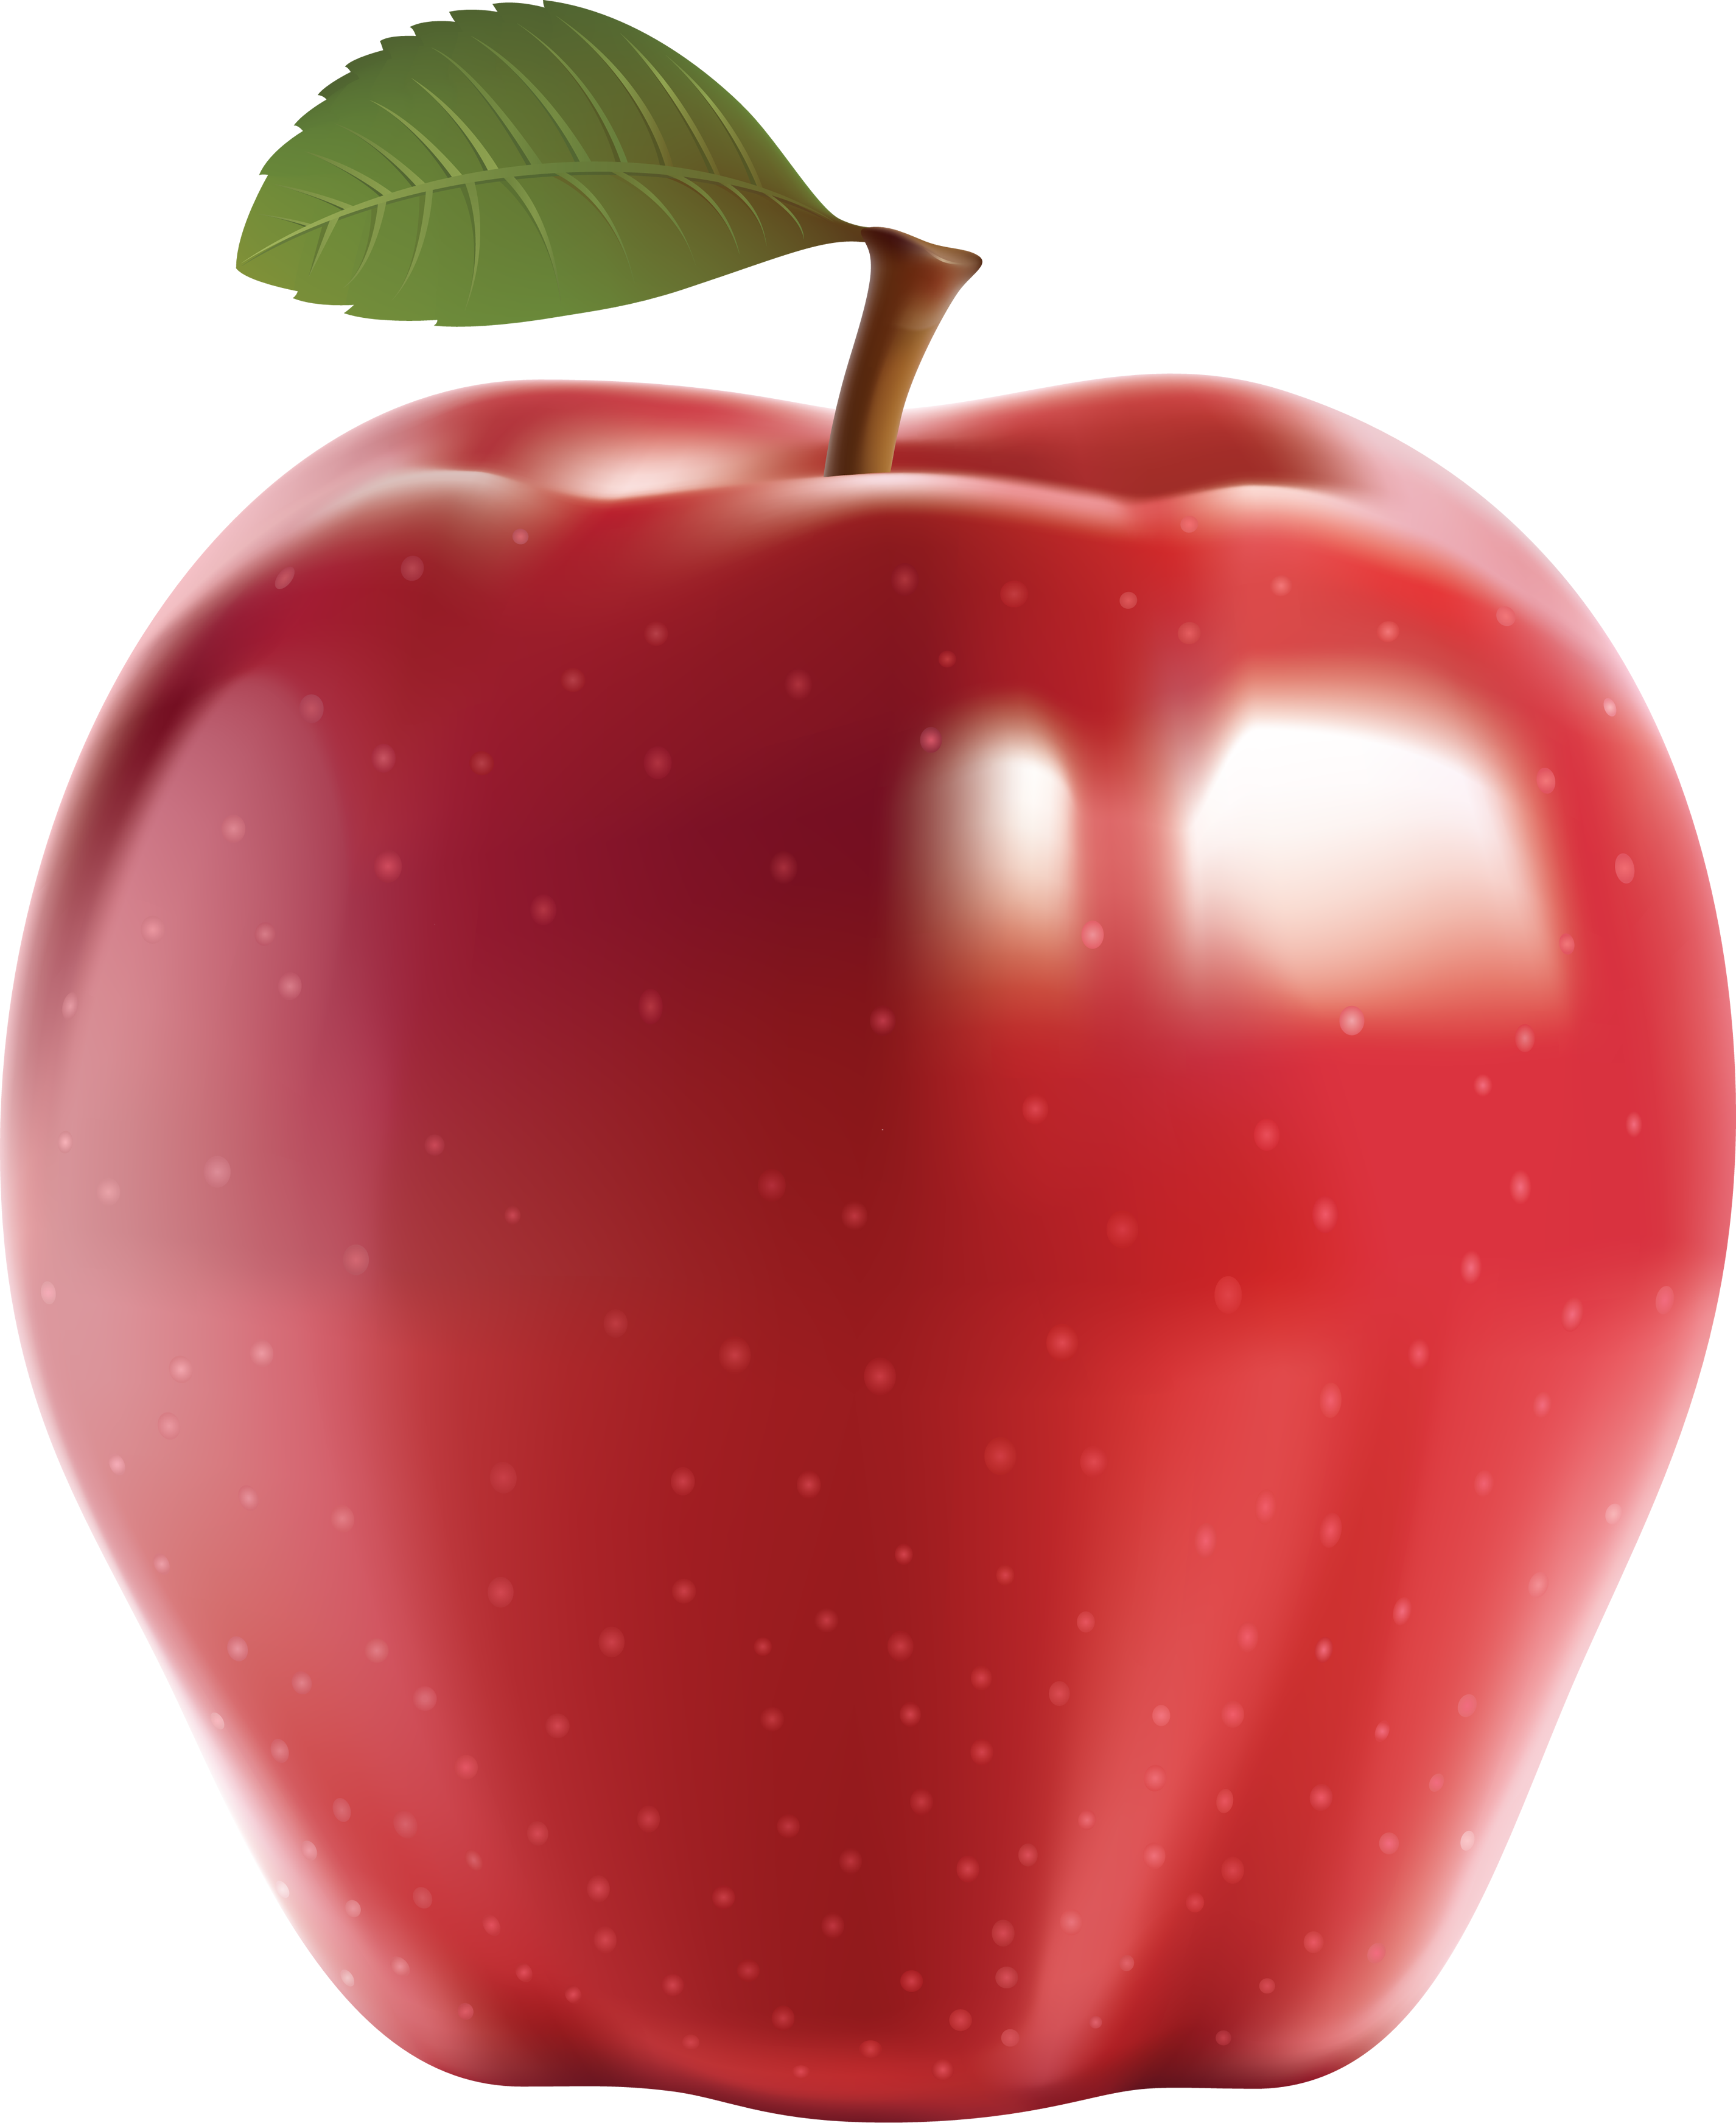 Apple PNG image #5